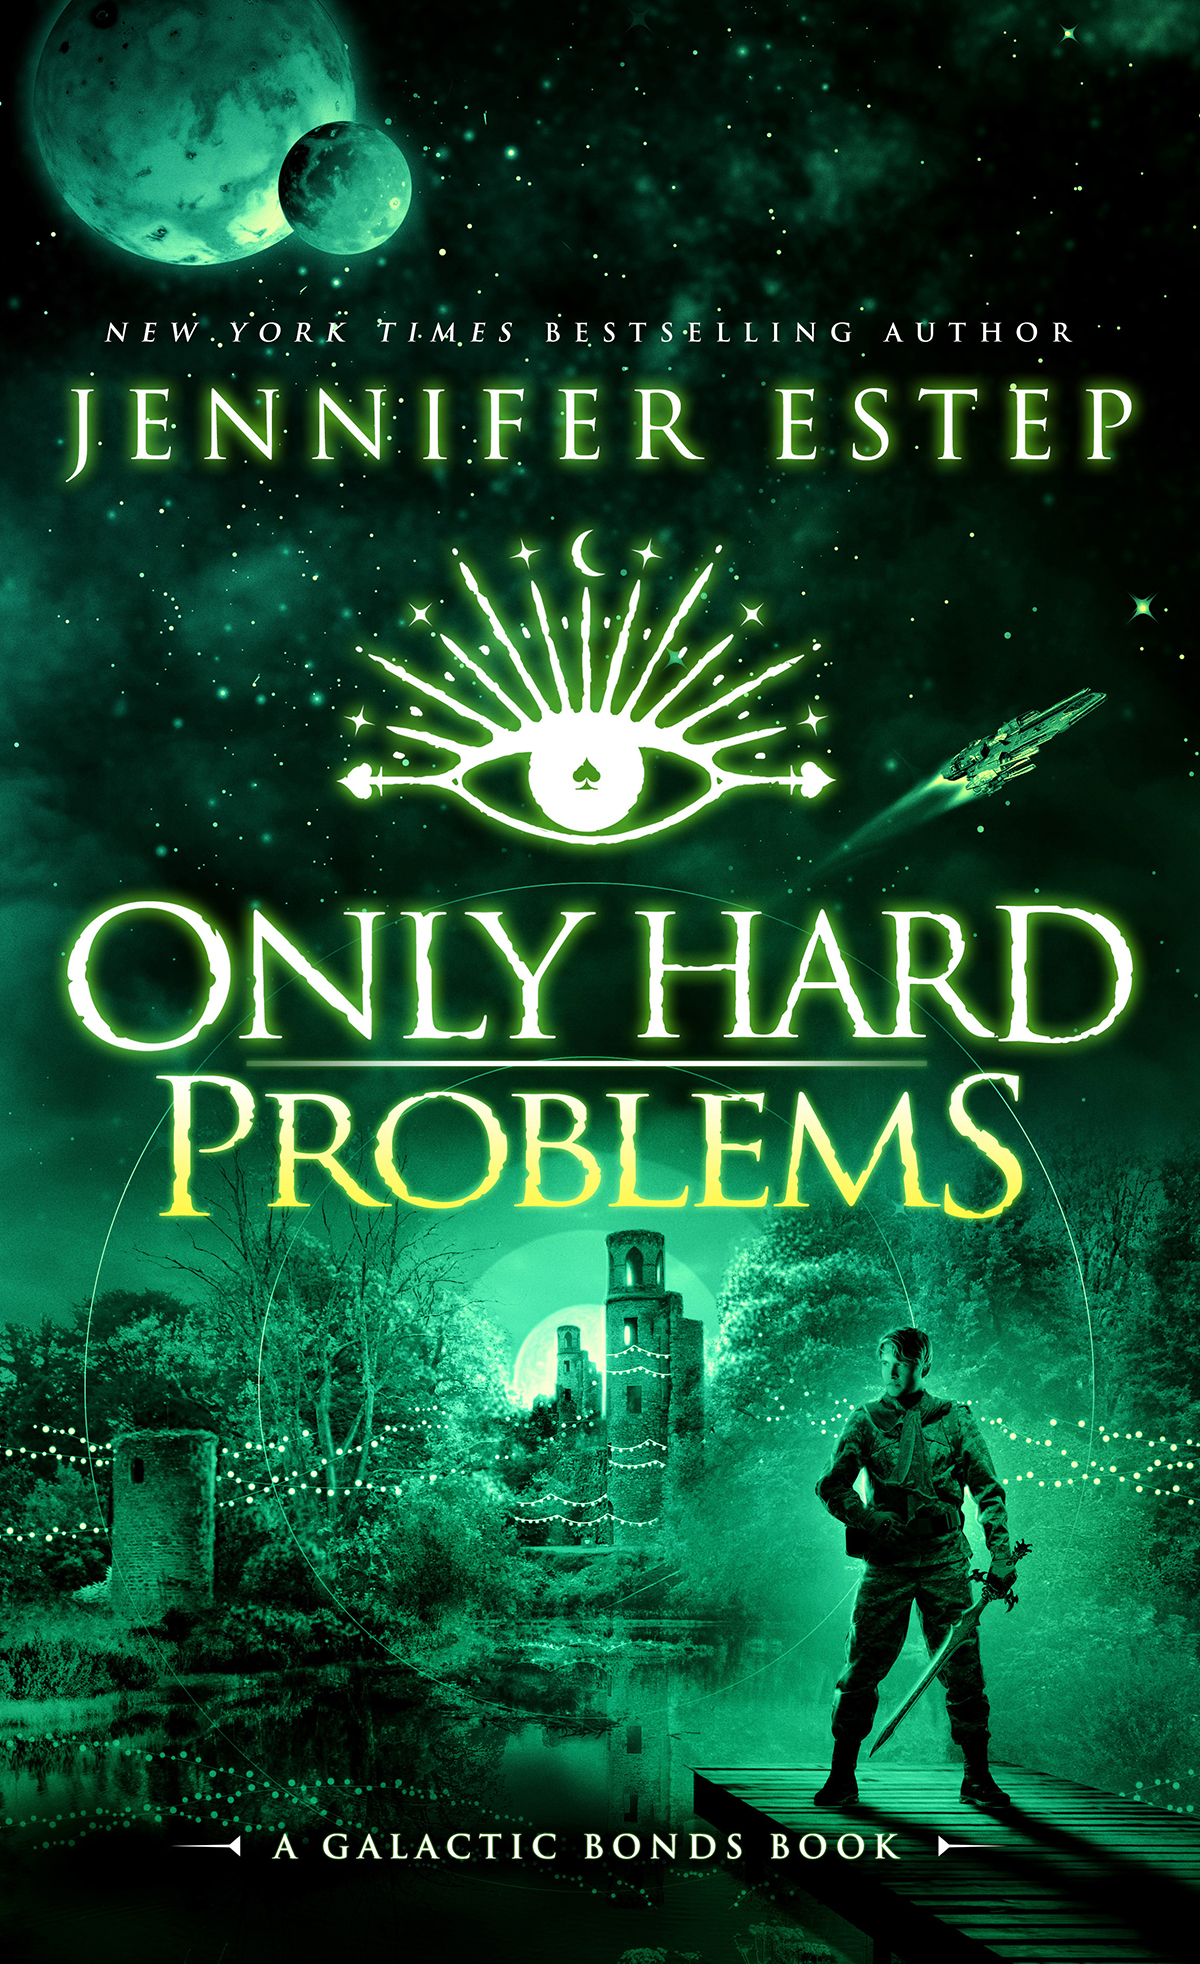 Only Hard Problems green cover art with man